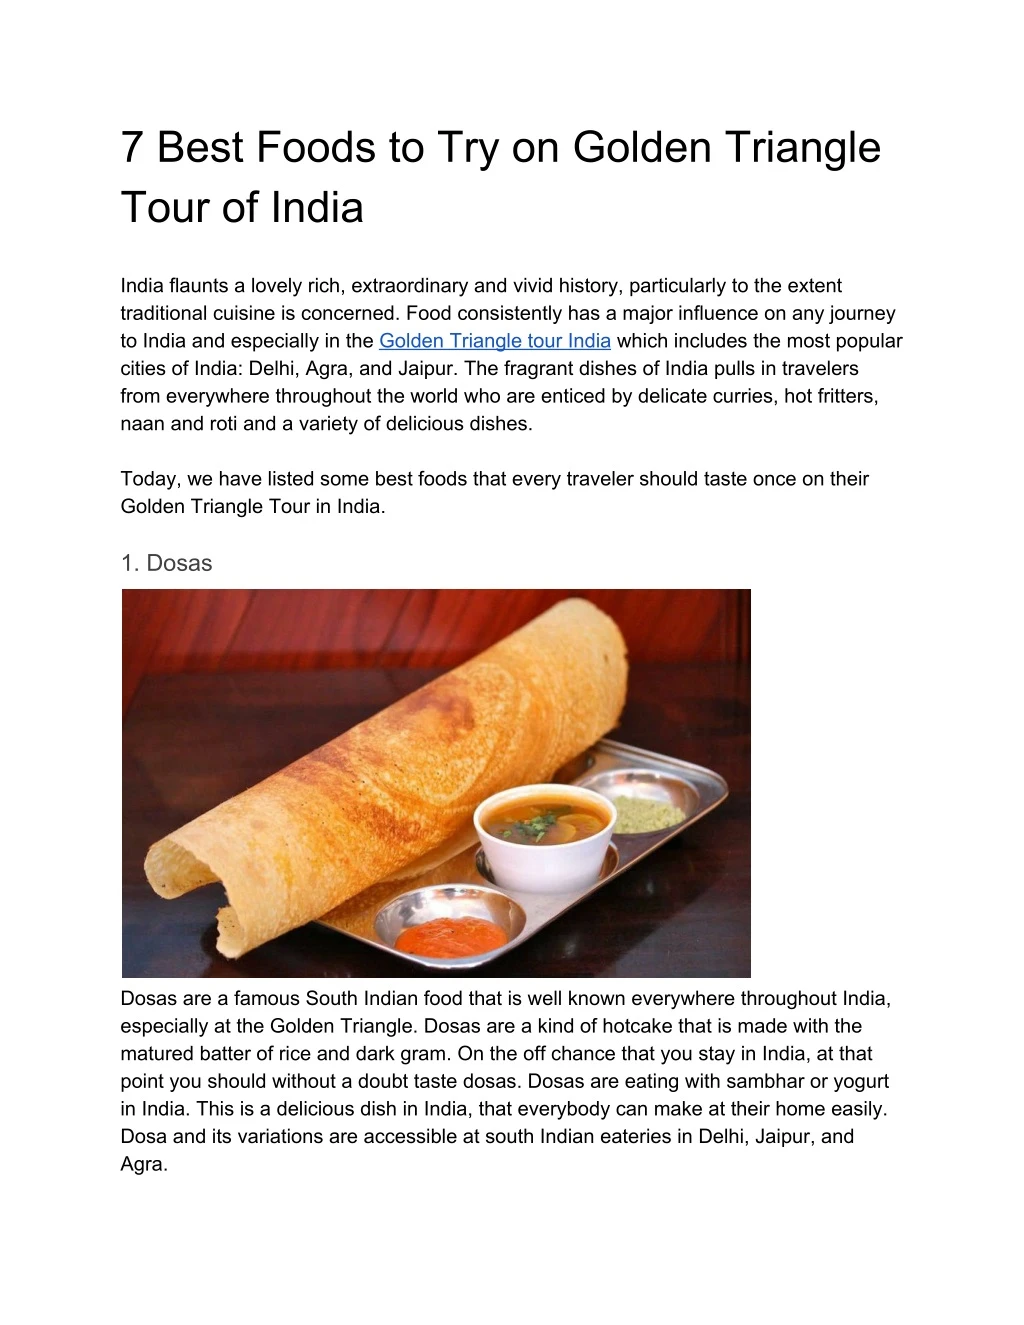 7 best foods to try on golden triangle tour